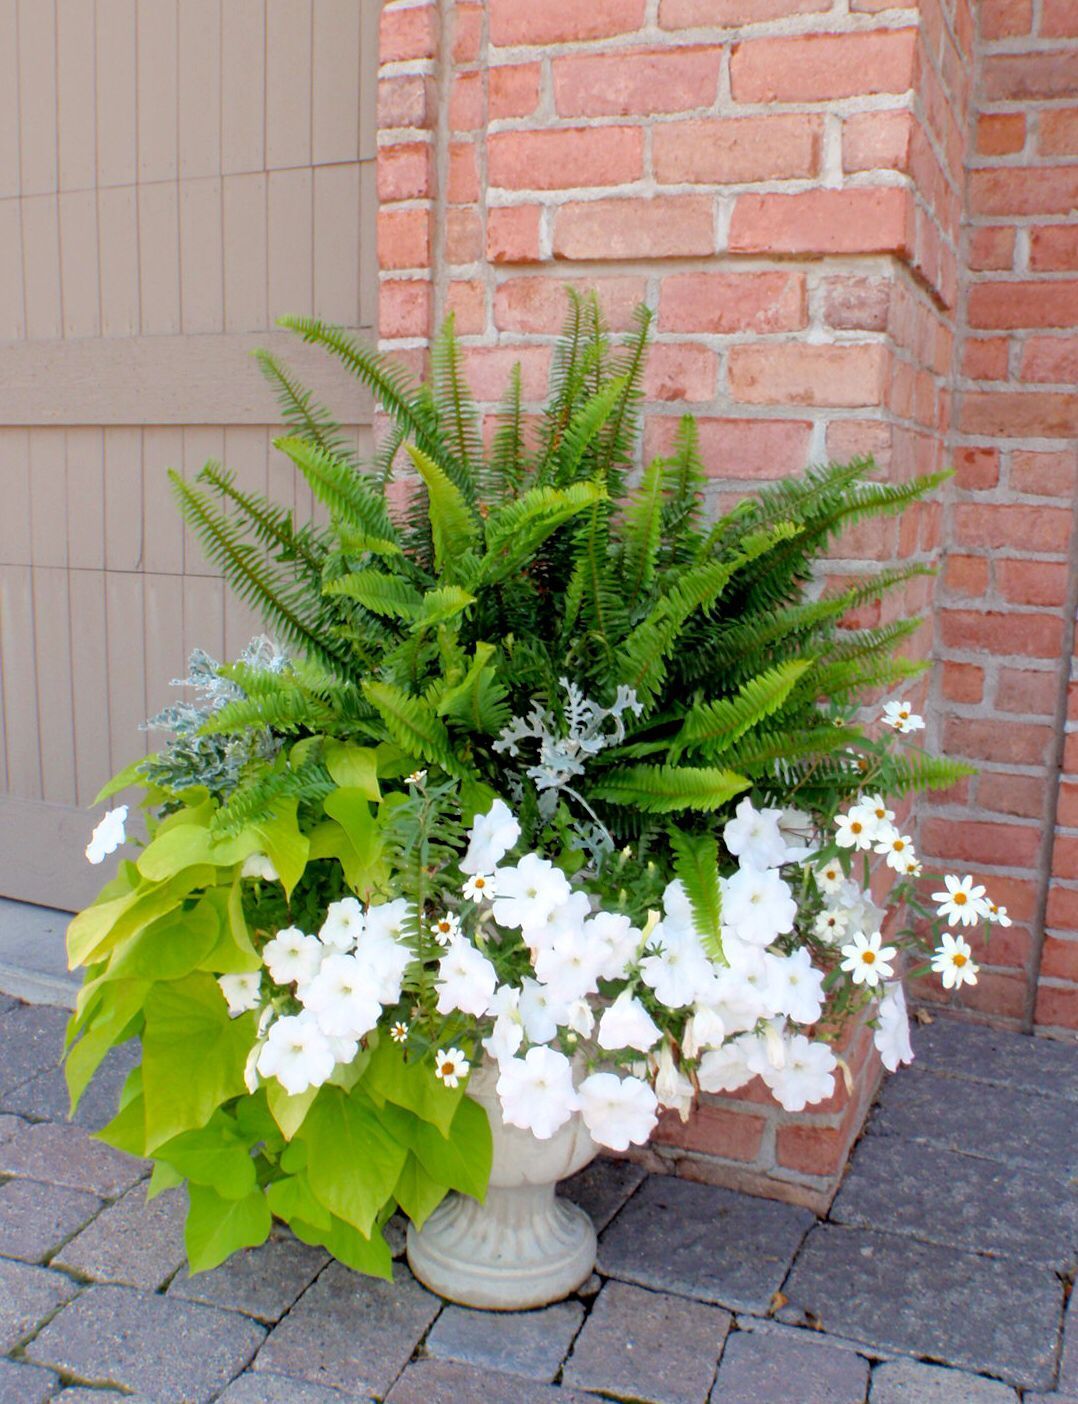 A pretty container with Fern impatience and sweet potato vine.